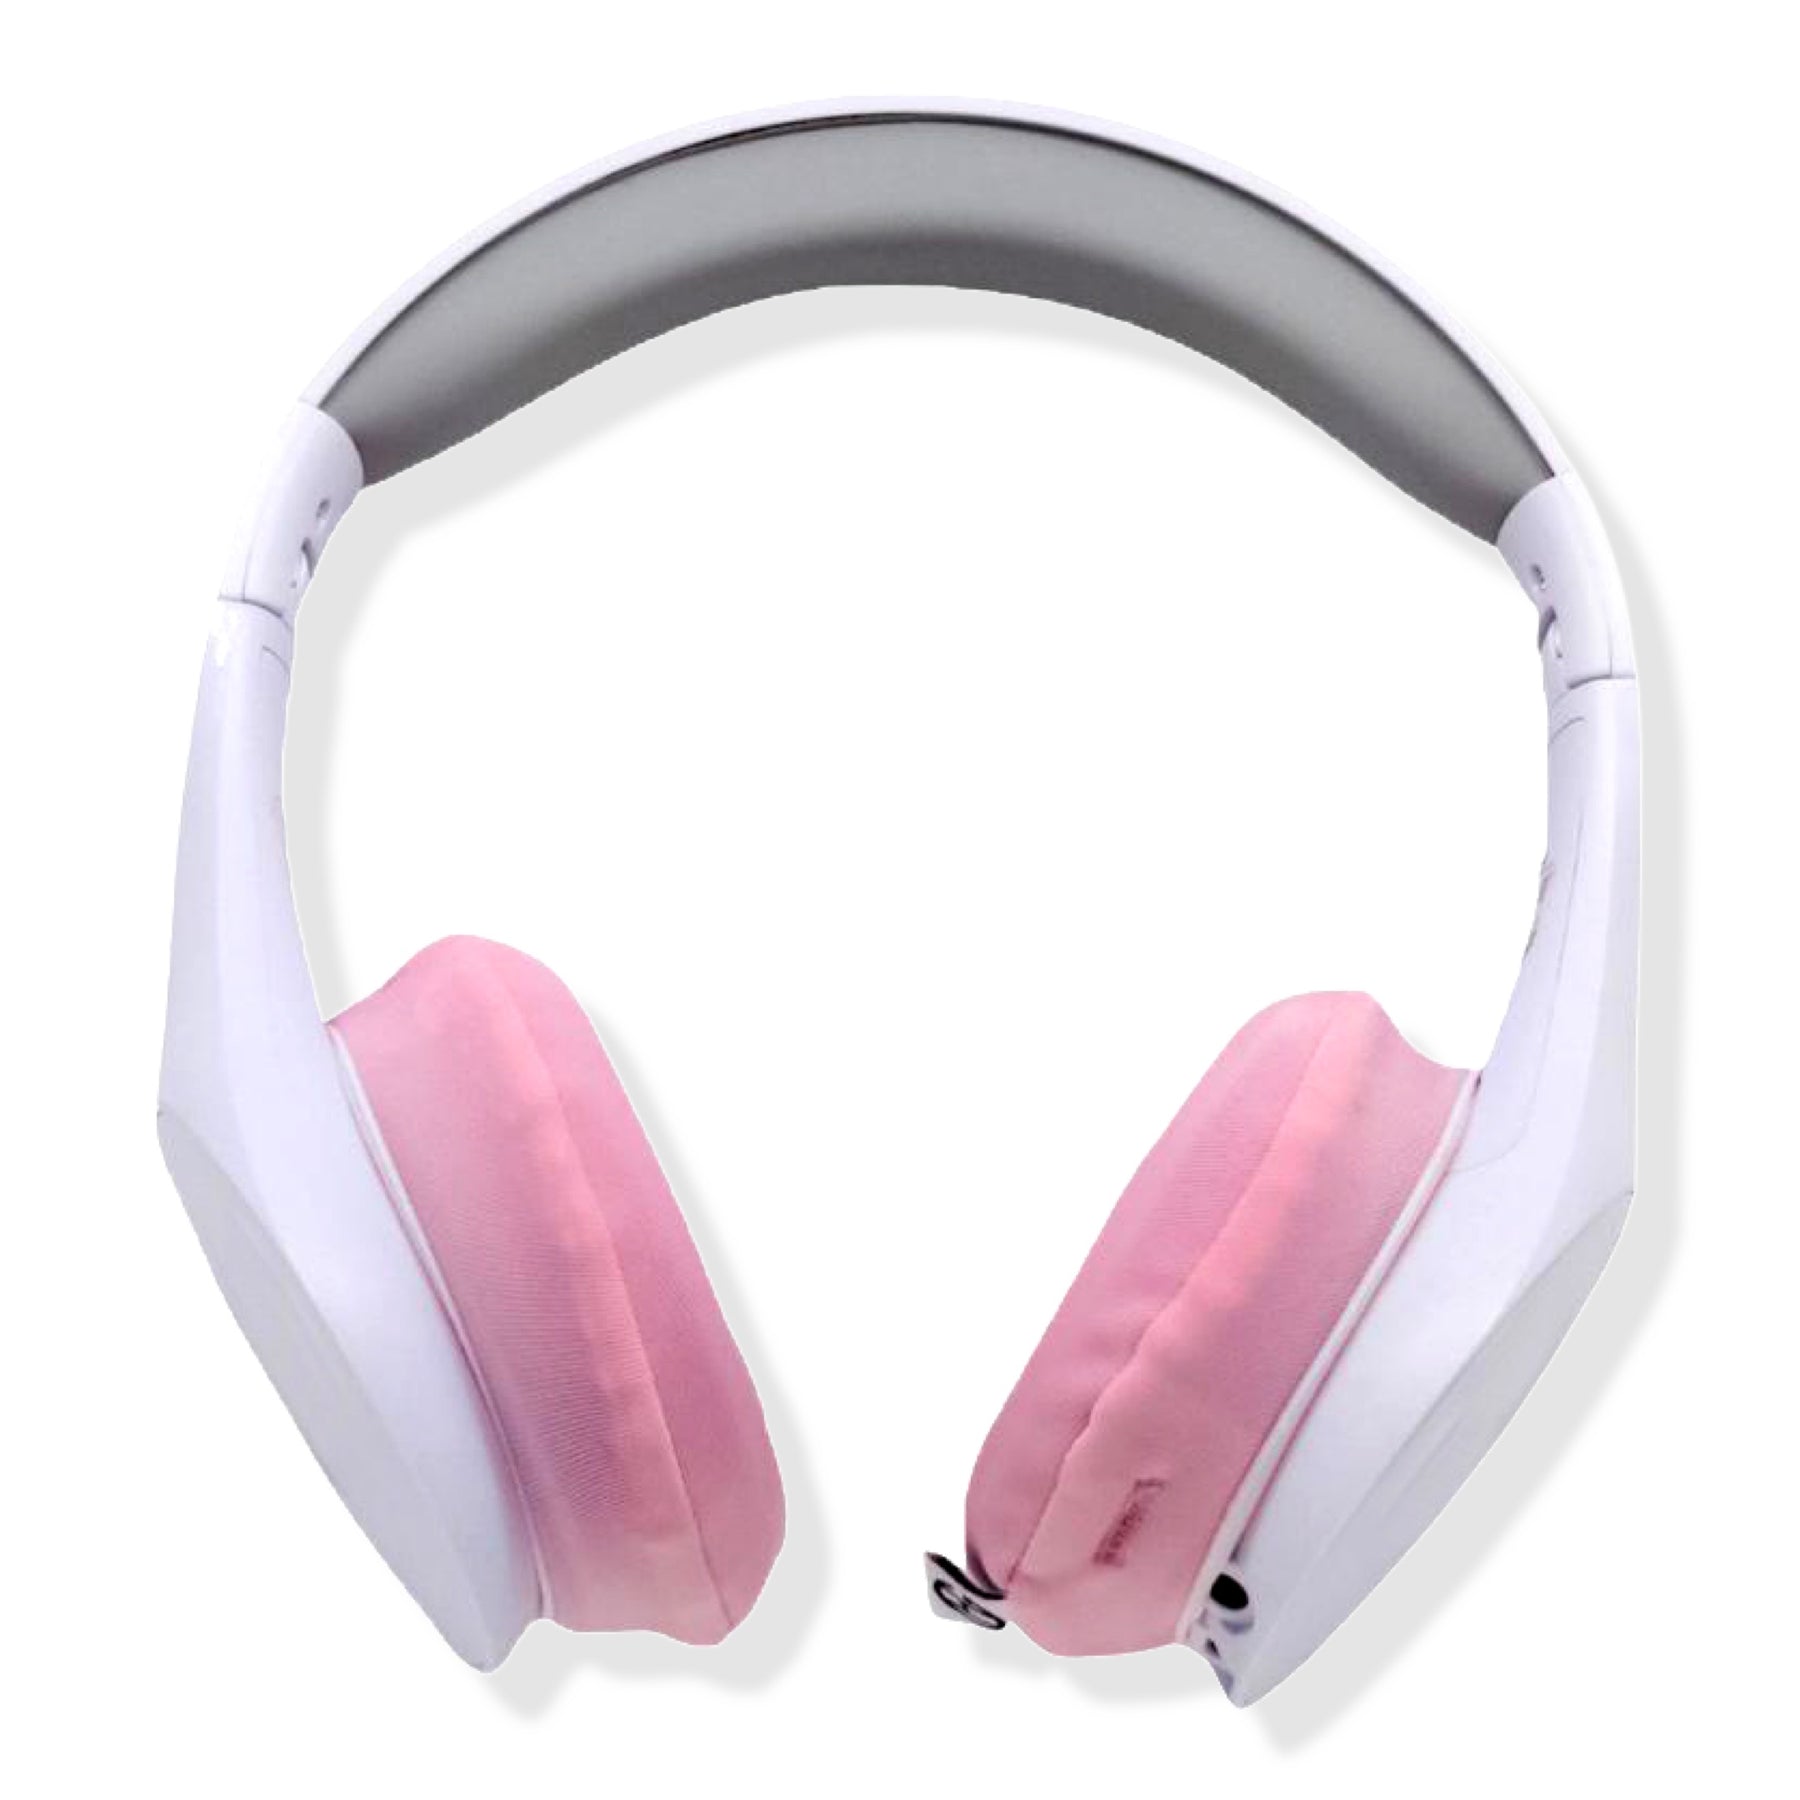 Keep your ears warm! Over-ear headphones as the statement accessory.